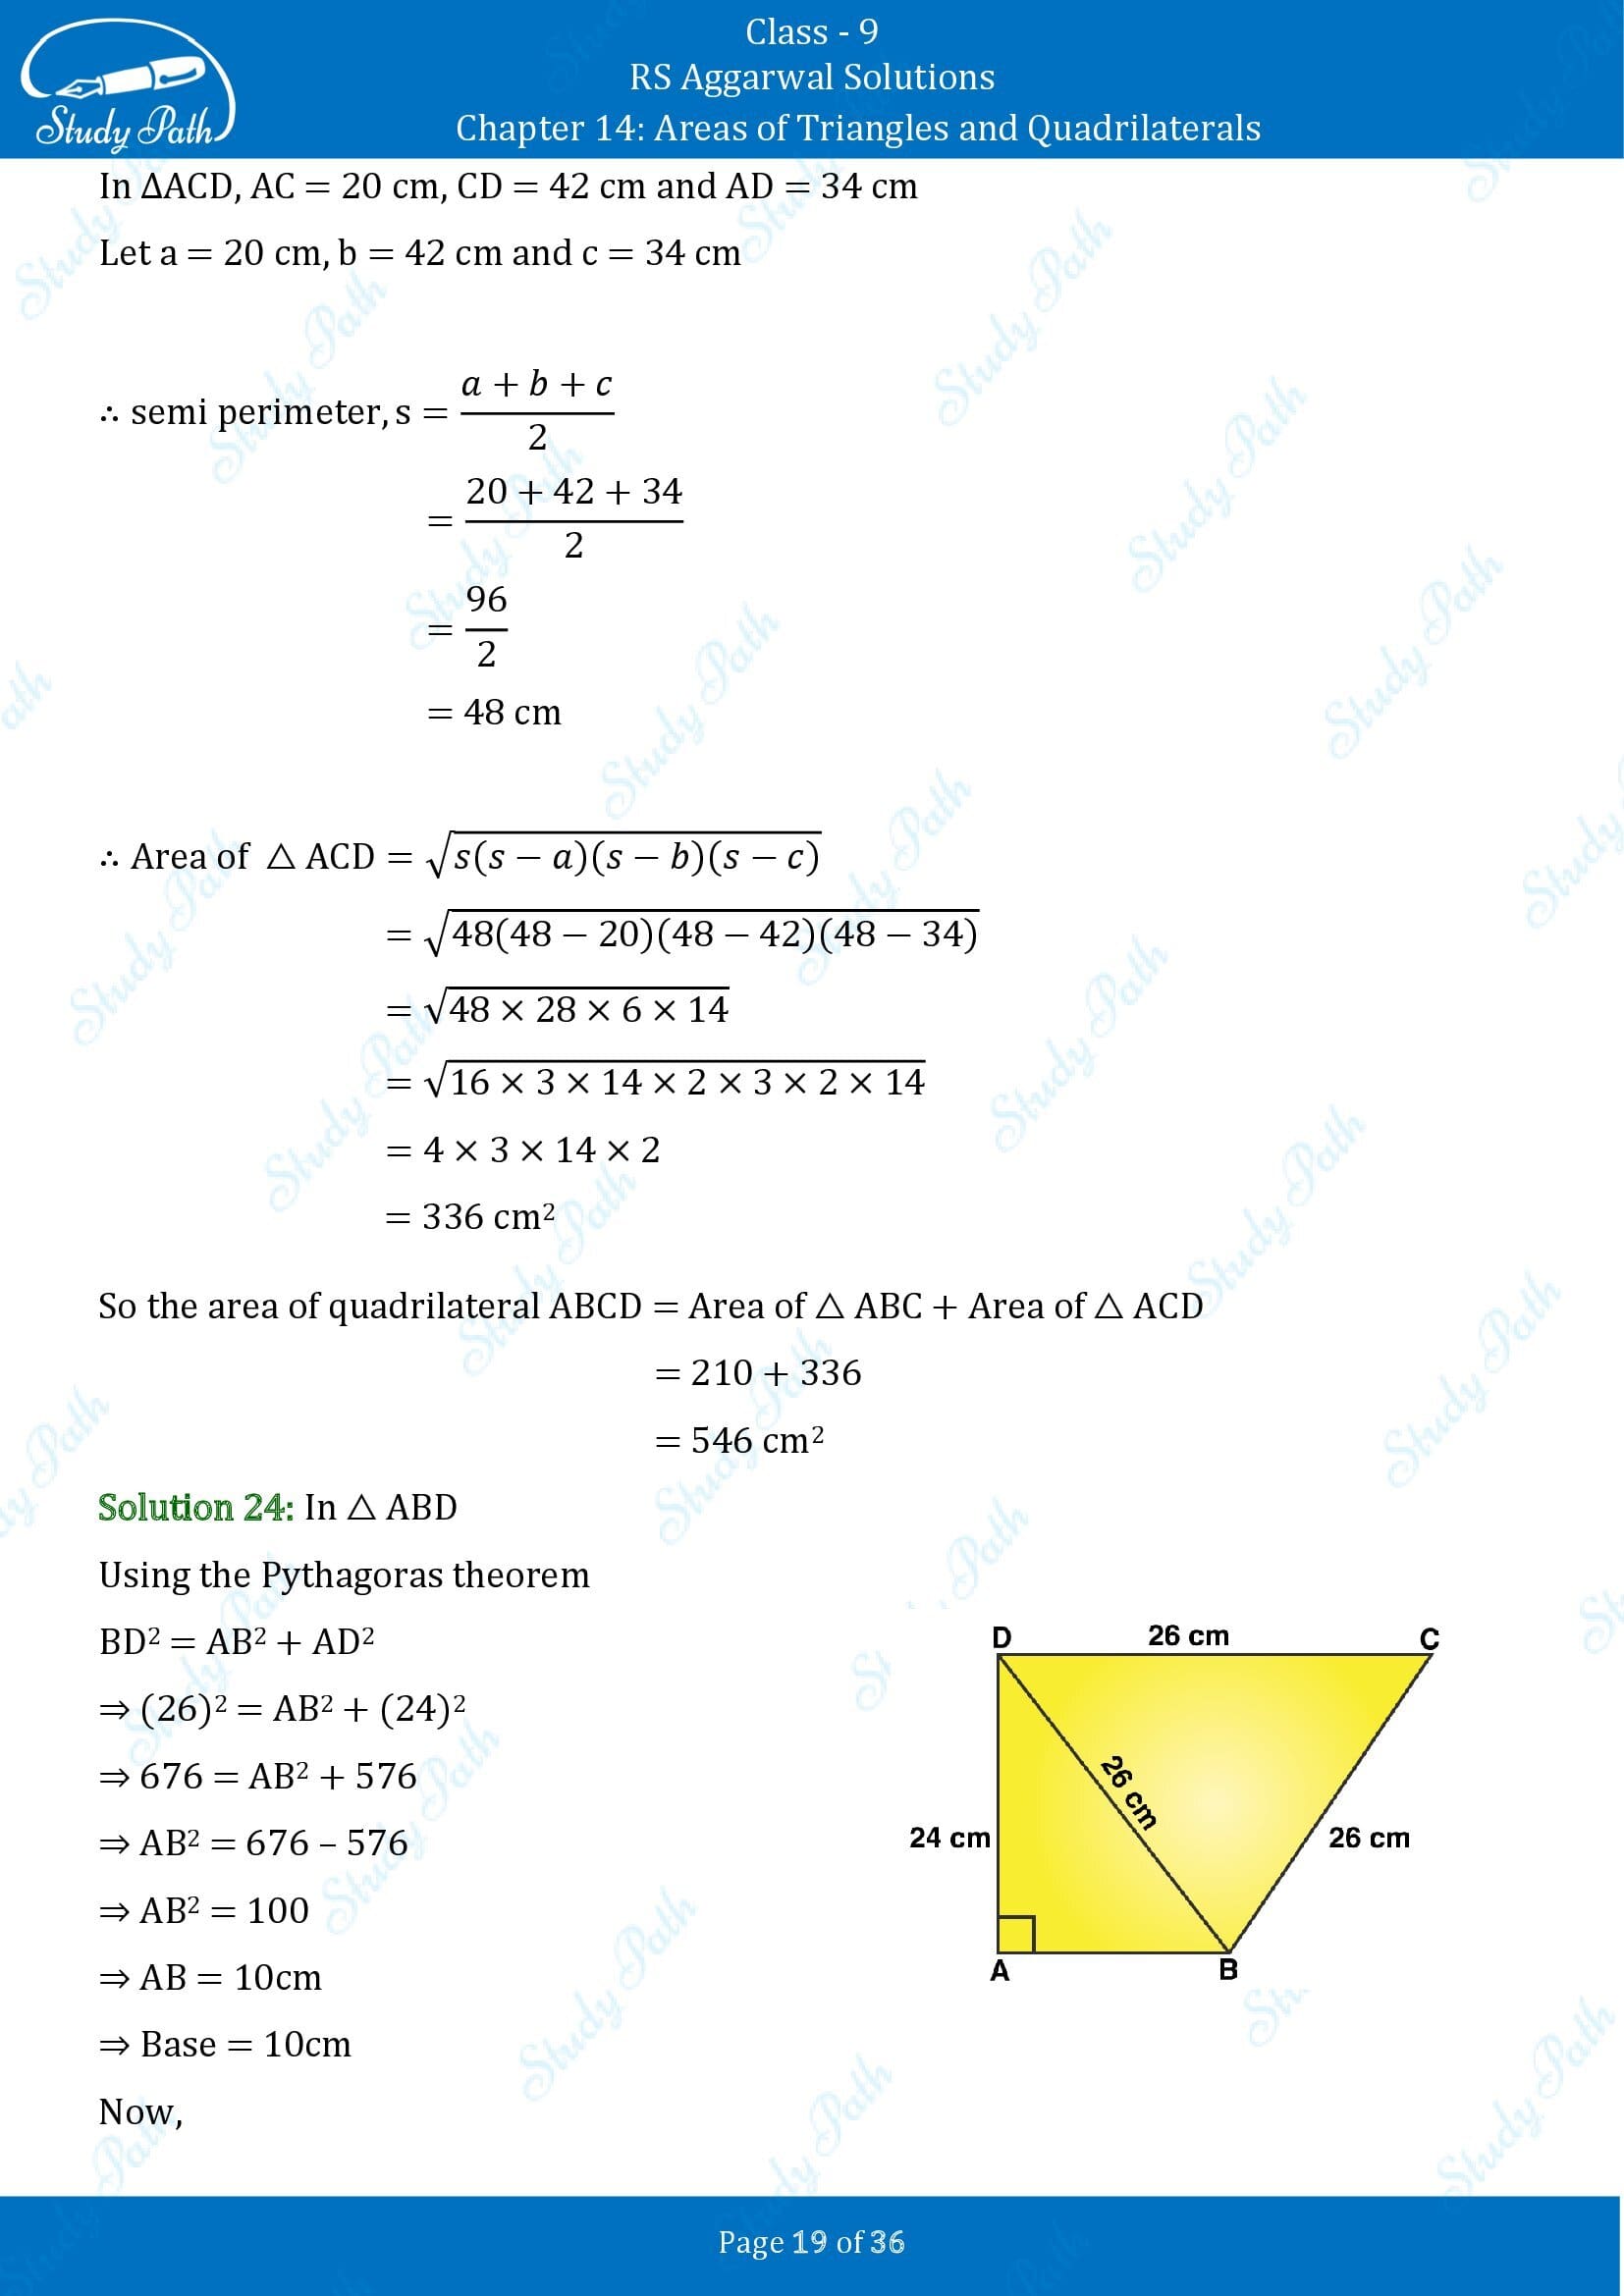 RS Aggarwal Solutions Class 9 Chapter 14 Areas of Triangles and Quadrilaterals Exercise 14 00019